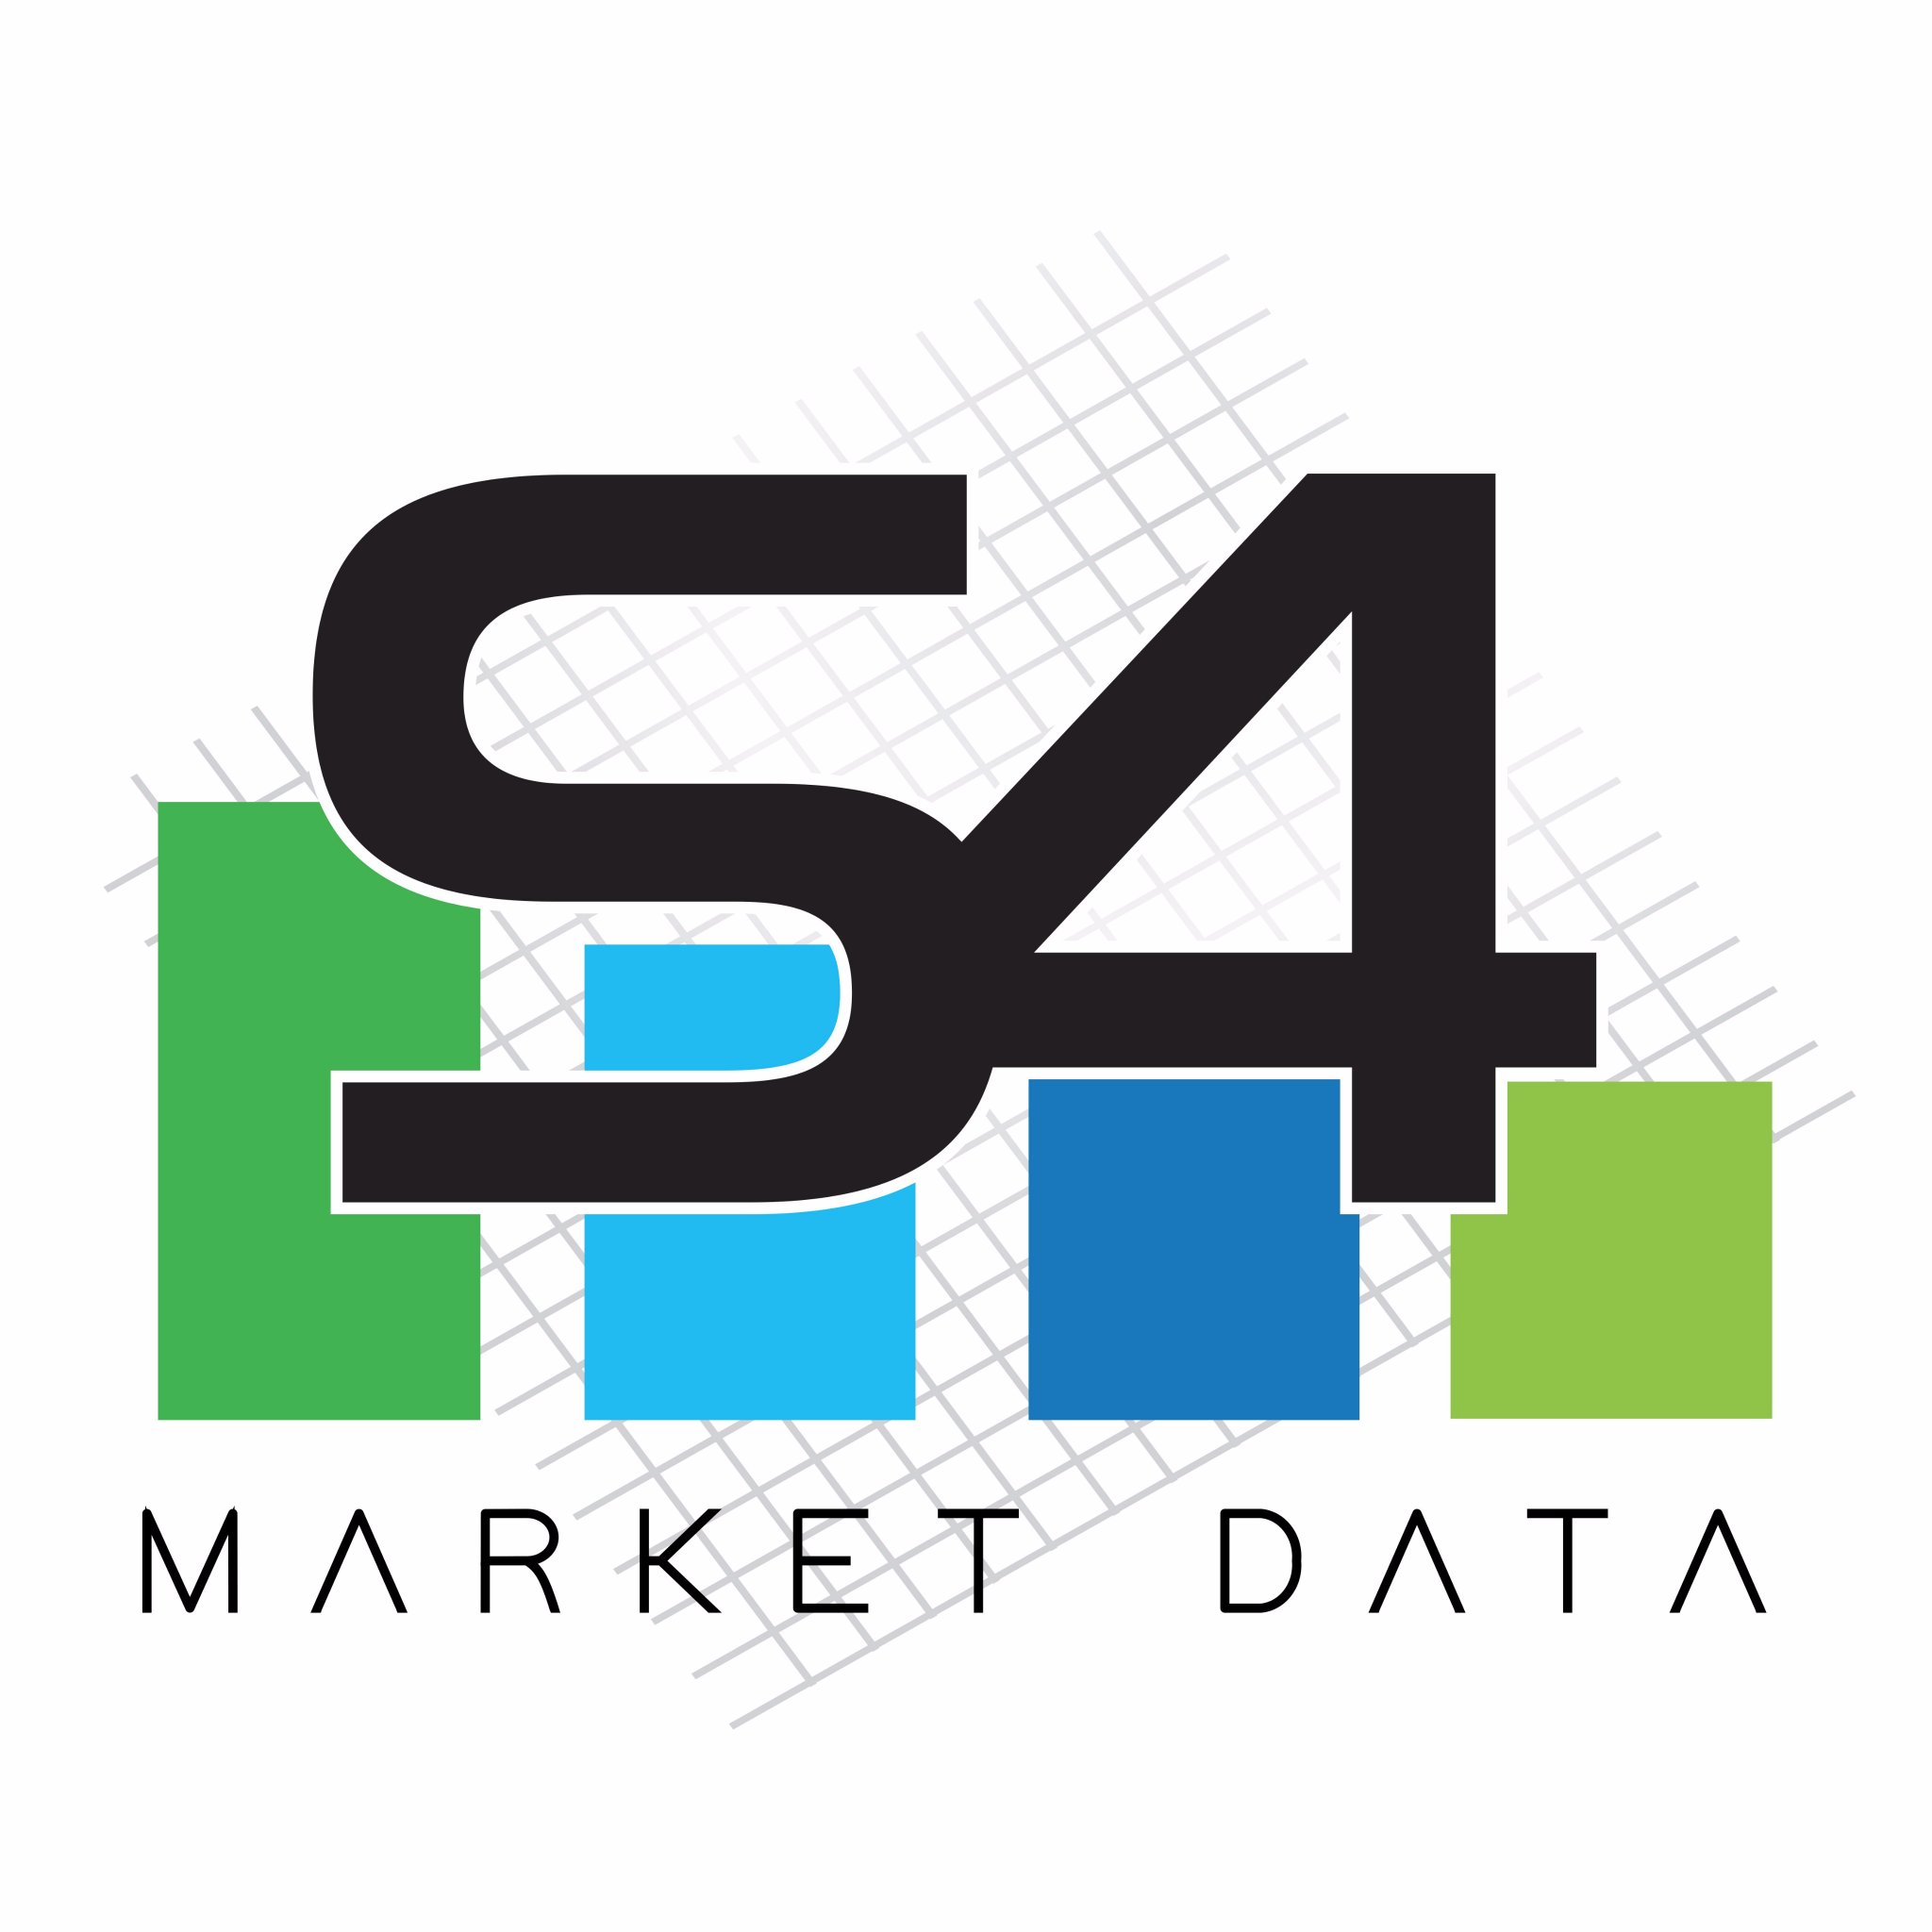 S4 Market Data provides strategic solutions to address the growing  financial market data procurement and data management concerns for financial institutions.